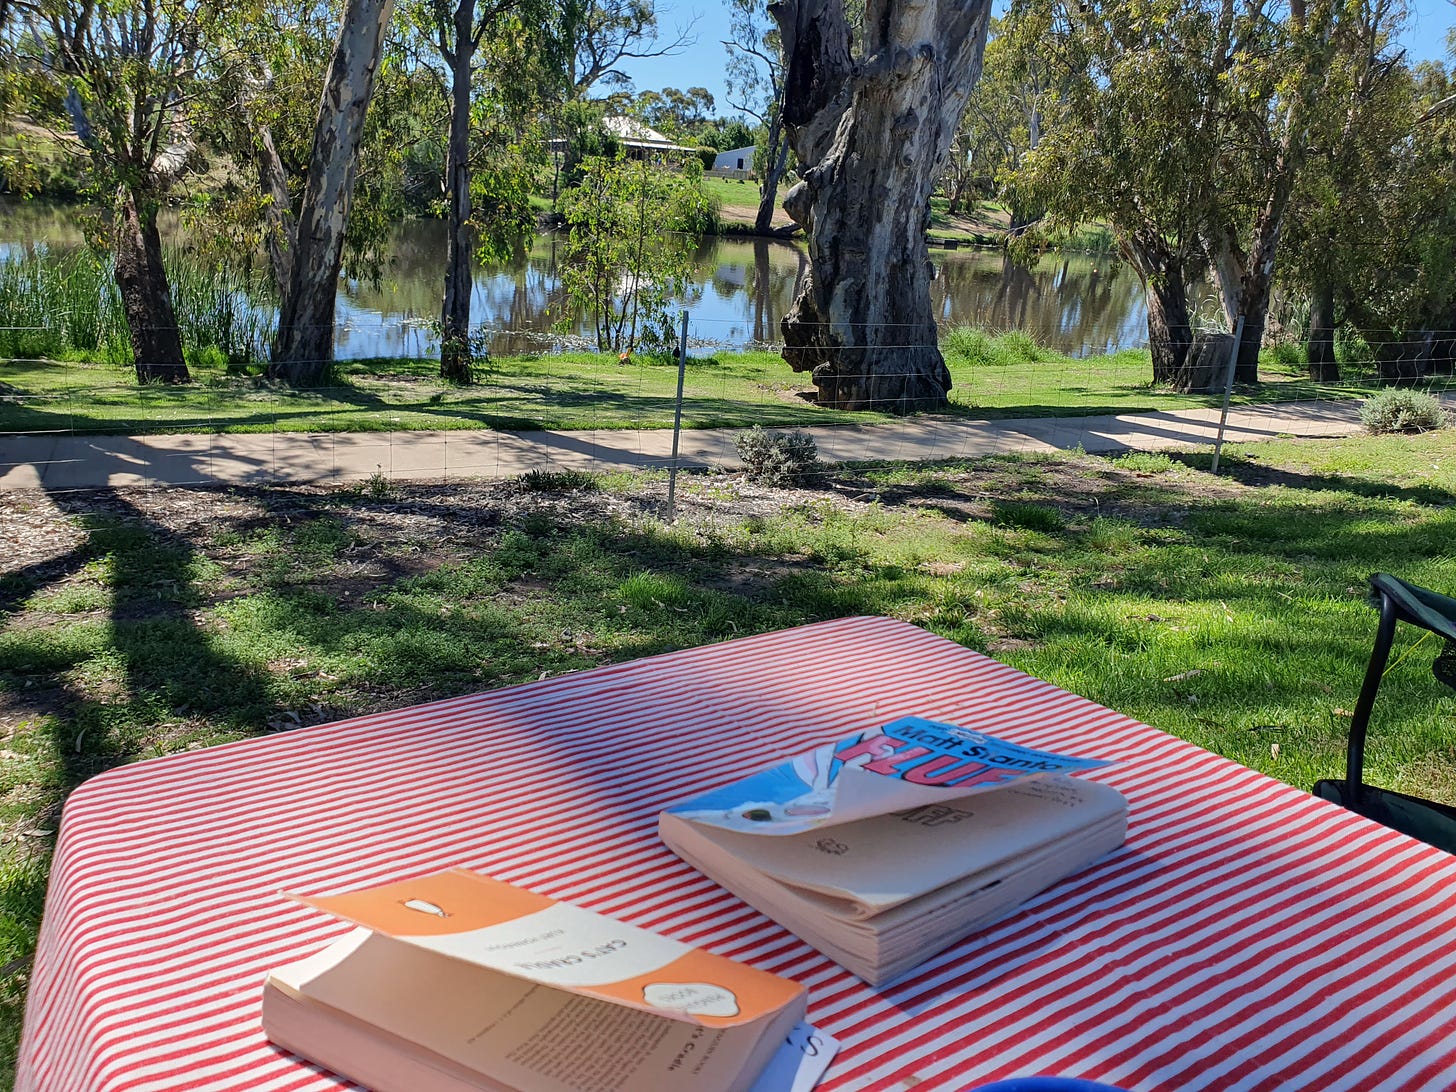 Two books on a camping table with red and white striped table cloth. A river, trees and grass can be seen in the close background.